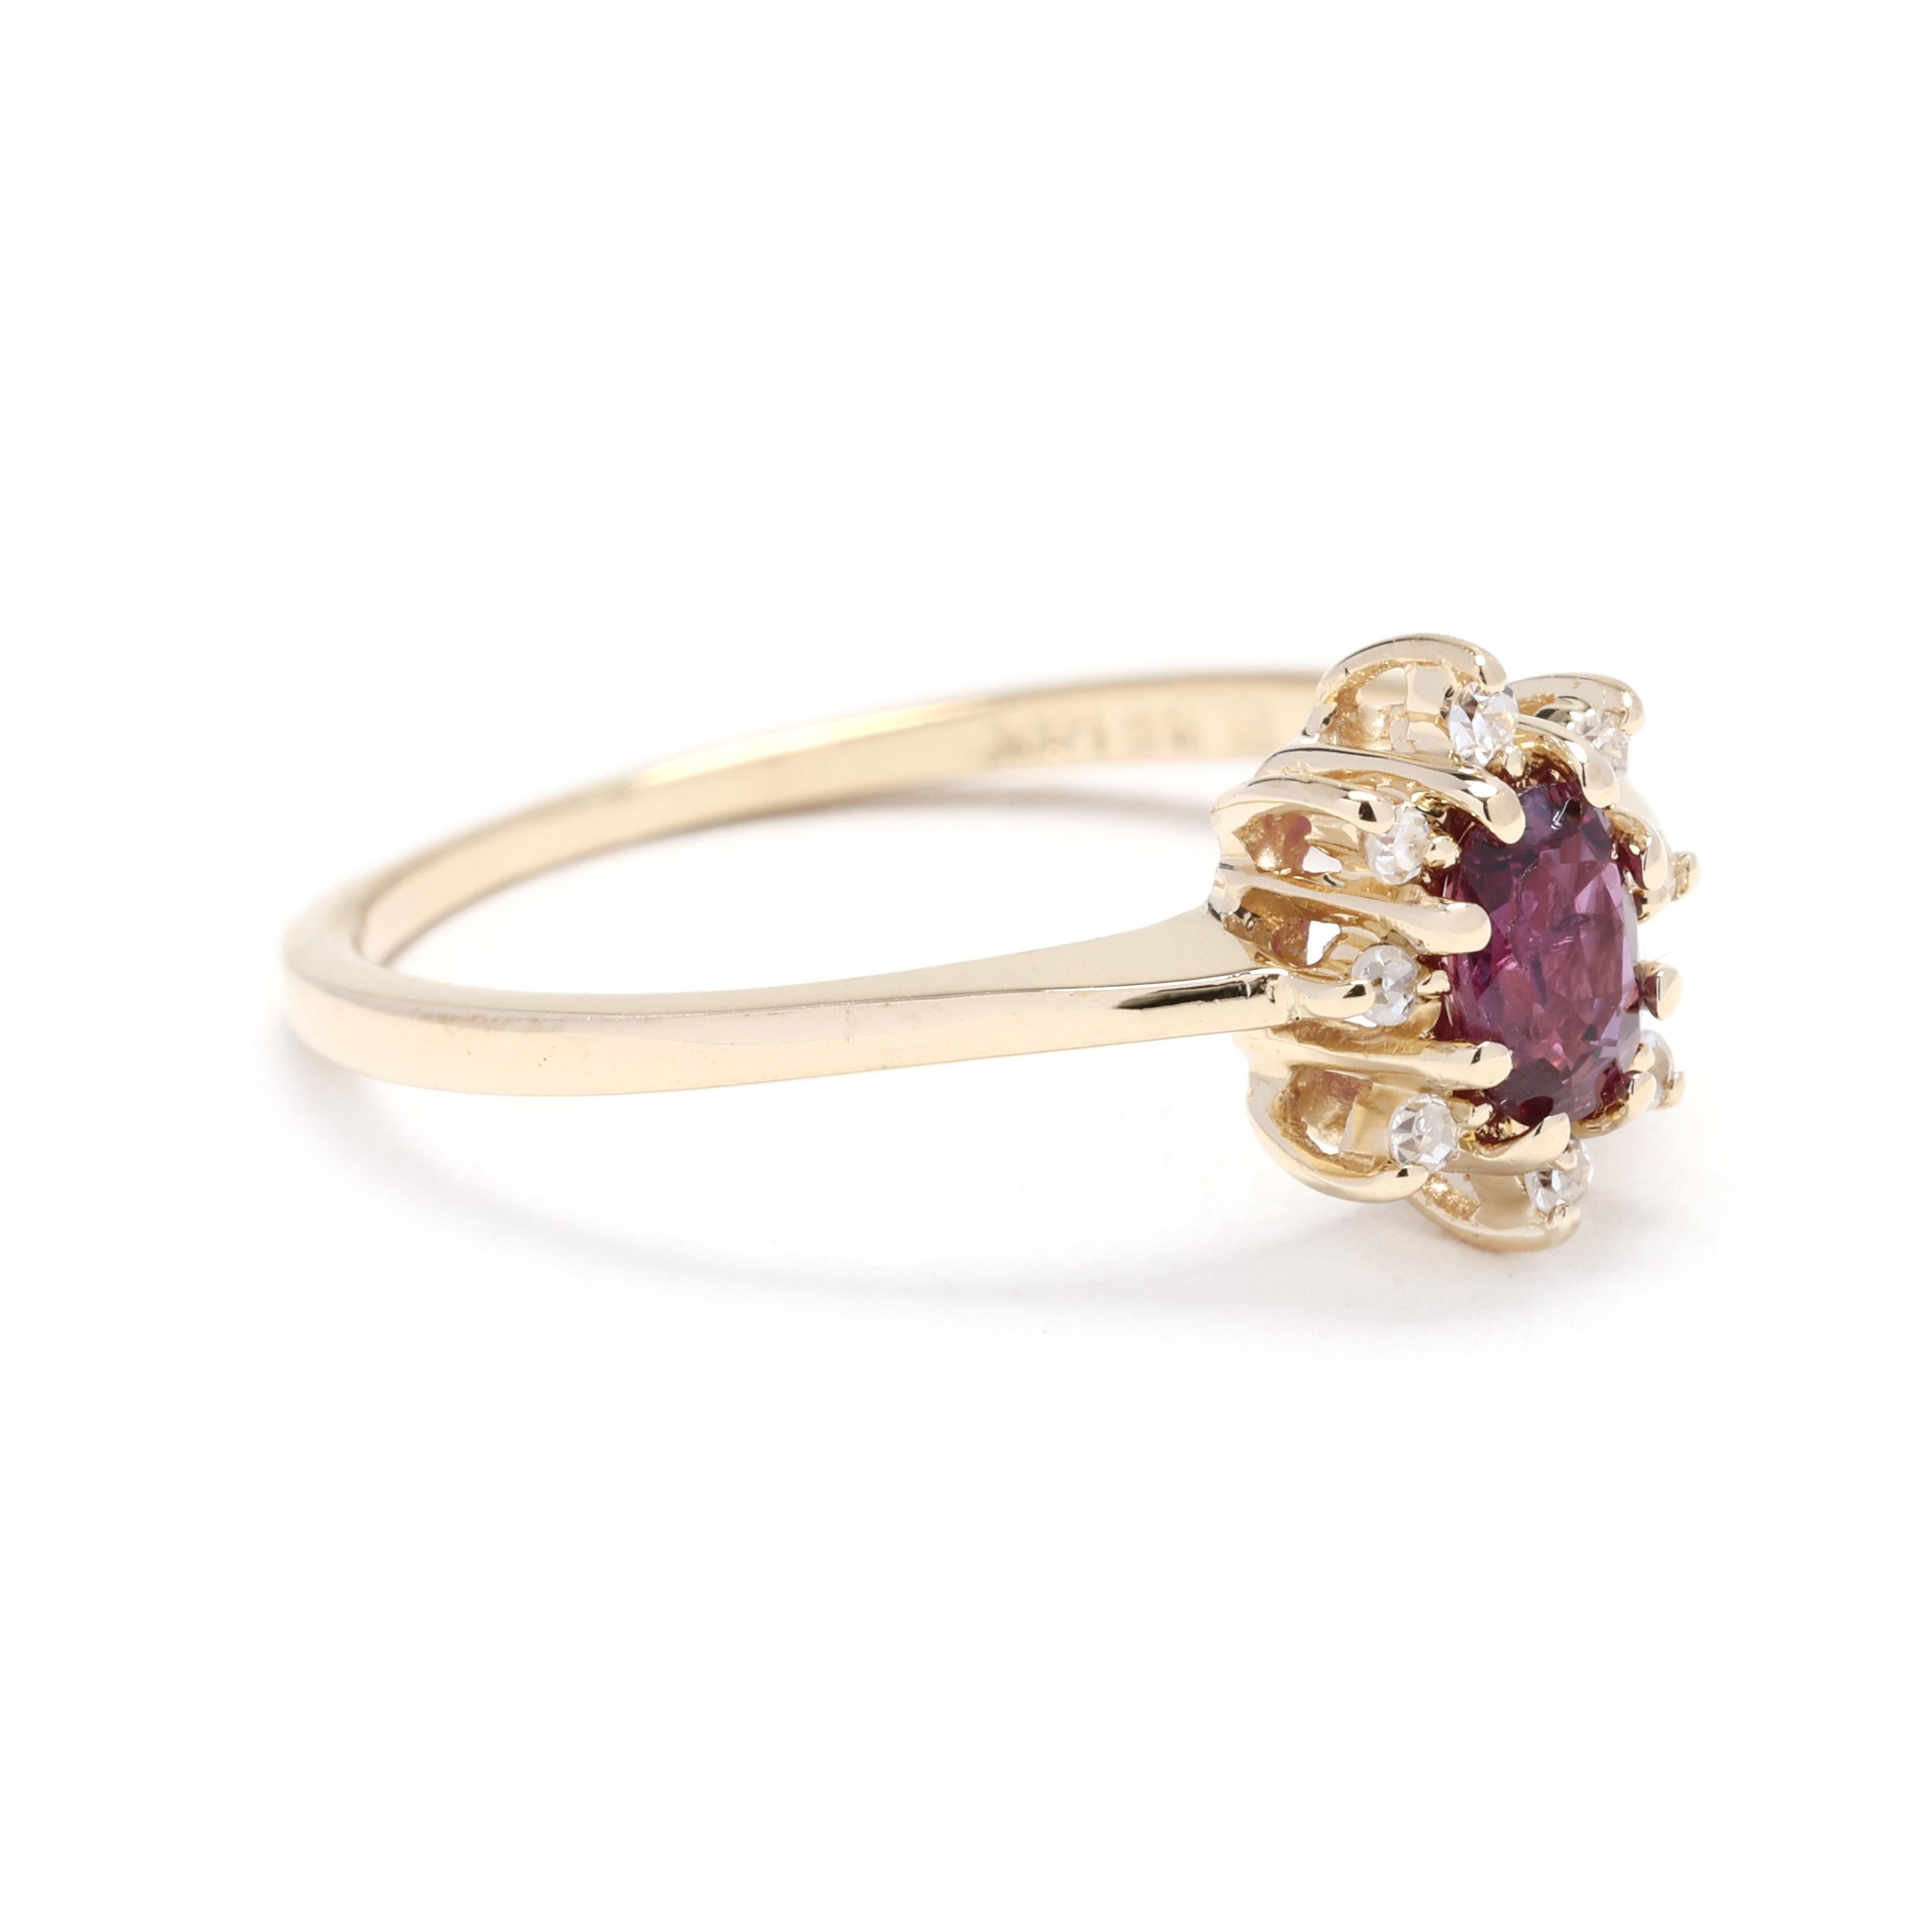 This stunning cocktail ring showcases a beautiful combination of diamonds and rubies. Crafted in 14k yellow gold, the ring features a 0.50ctw ruby center stone, surrounded by a halo of vibrant diamond gemstones. The diamonds and rubies are